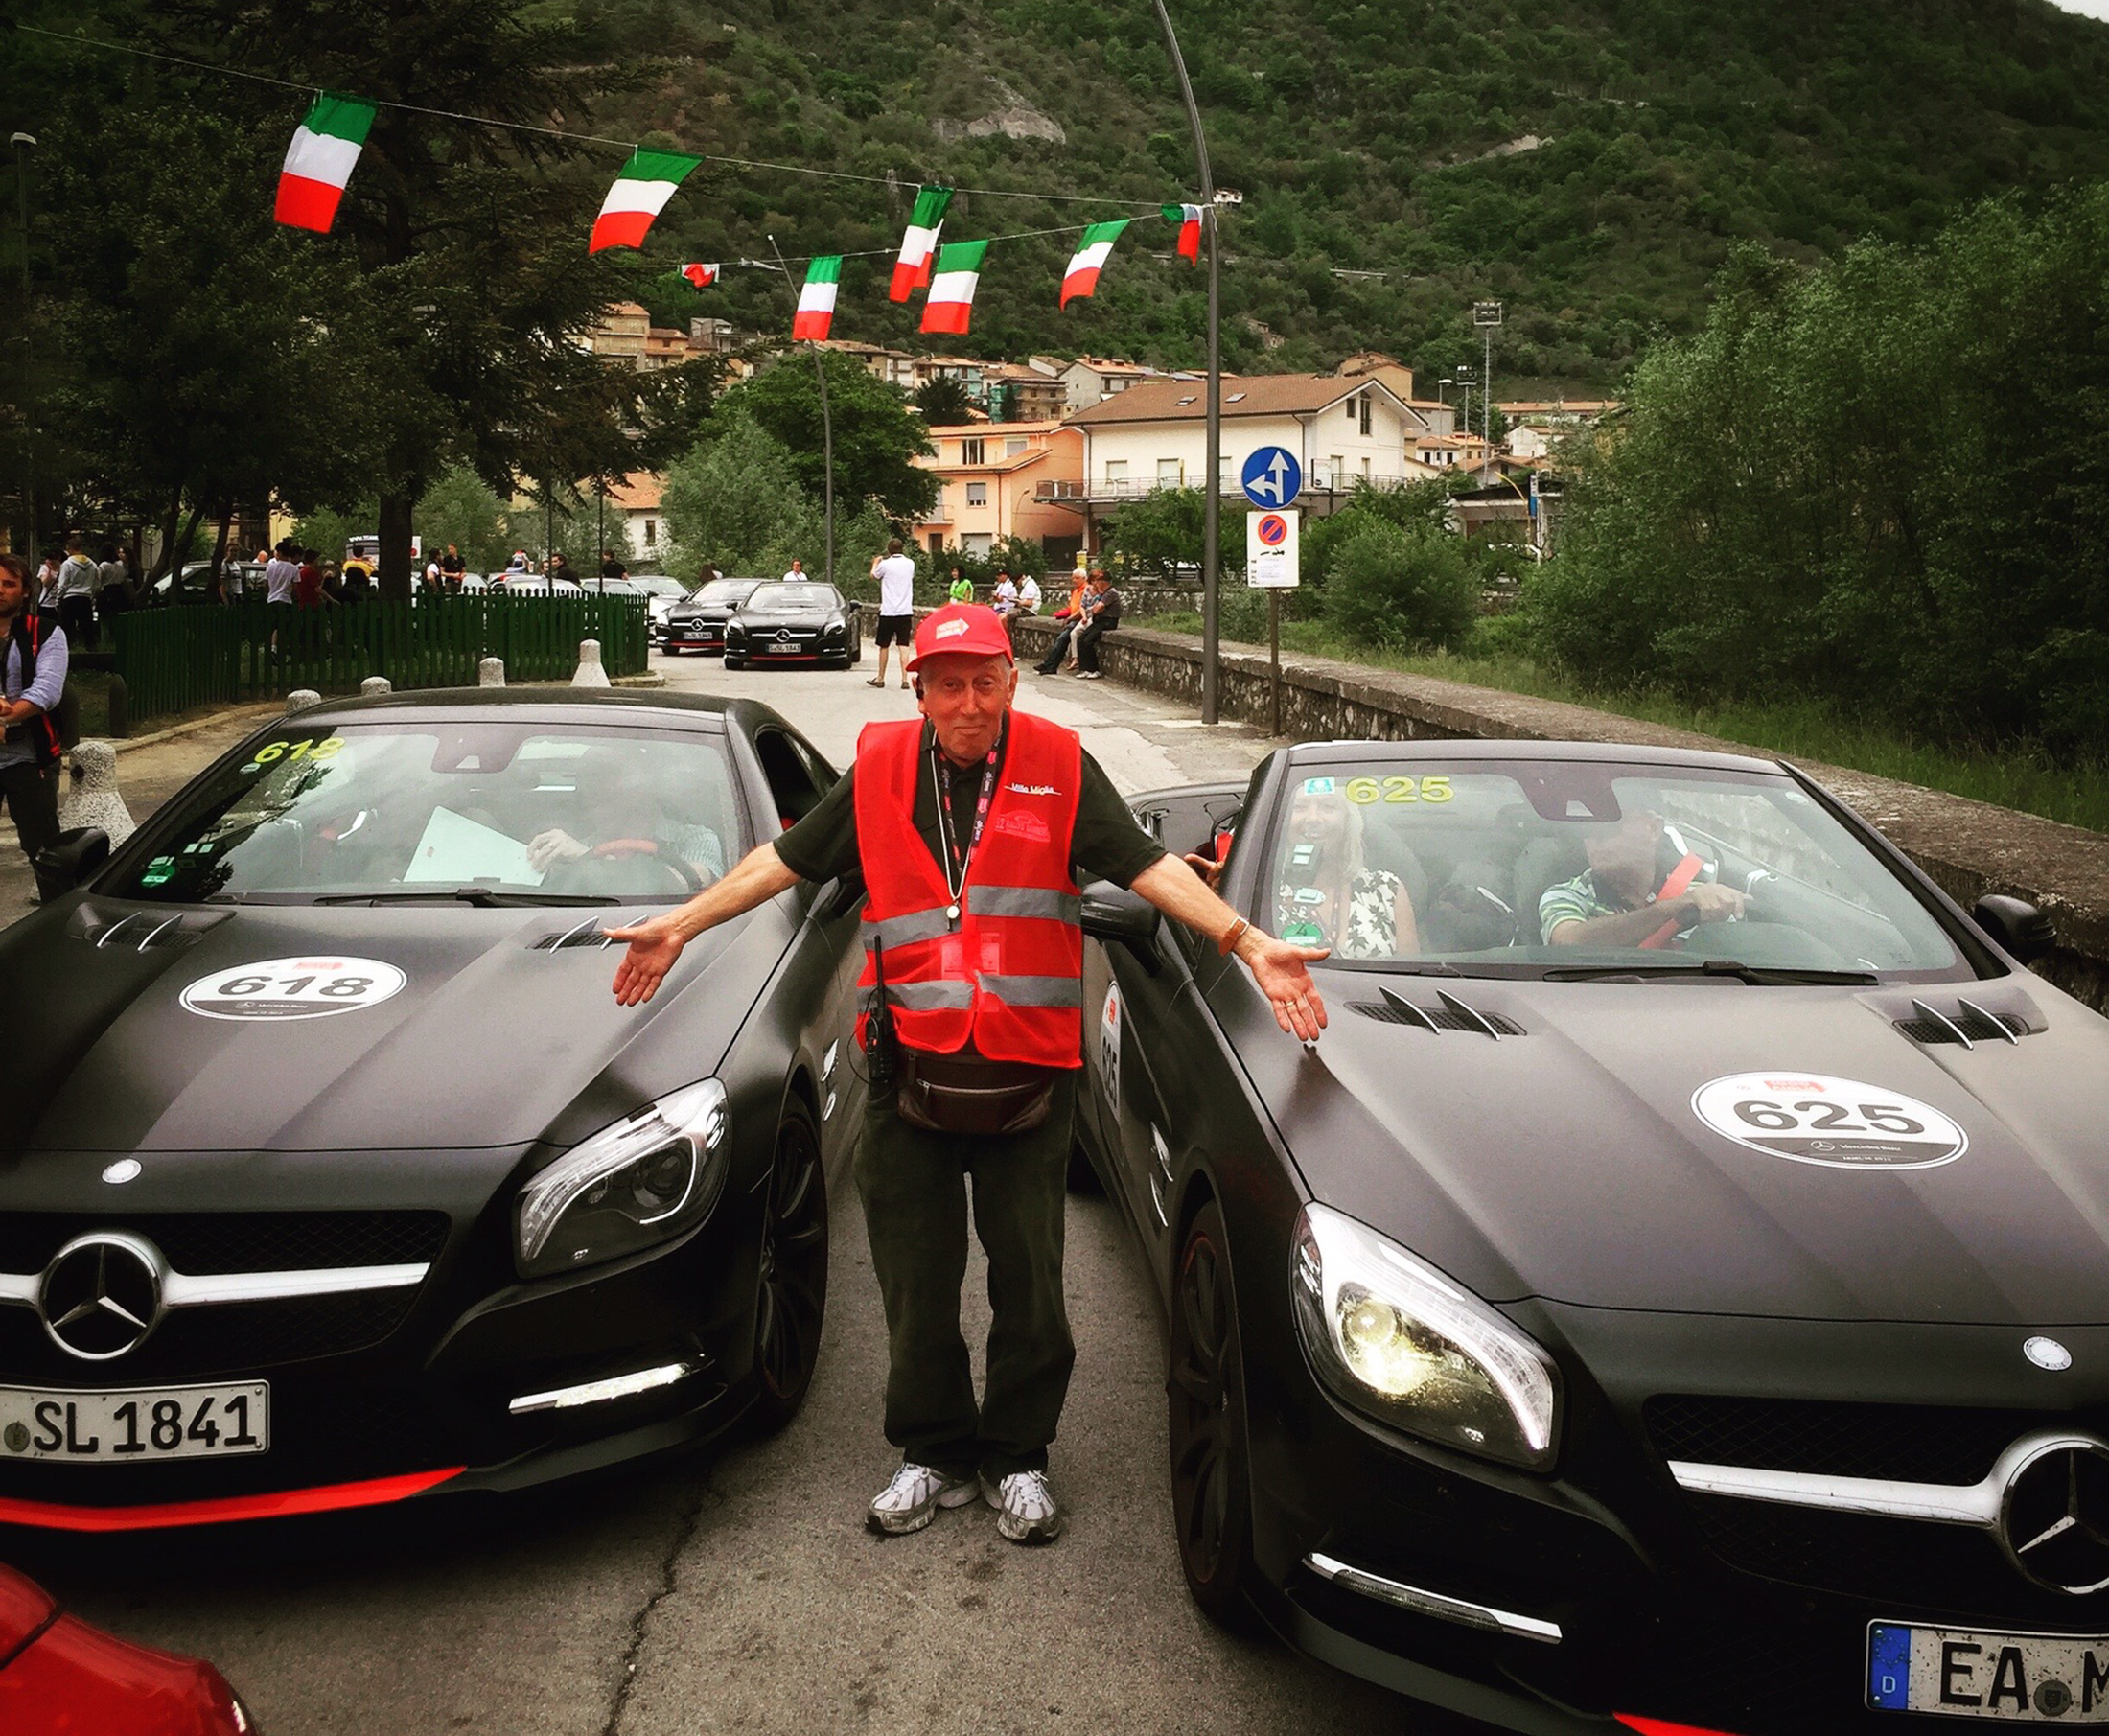 Coolhunting: Italy's Insane Mille Miglia